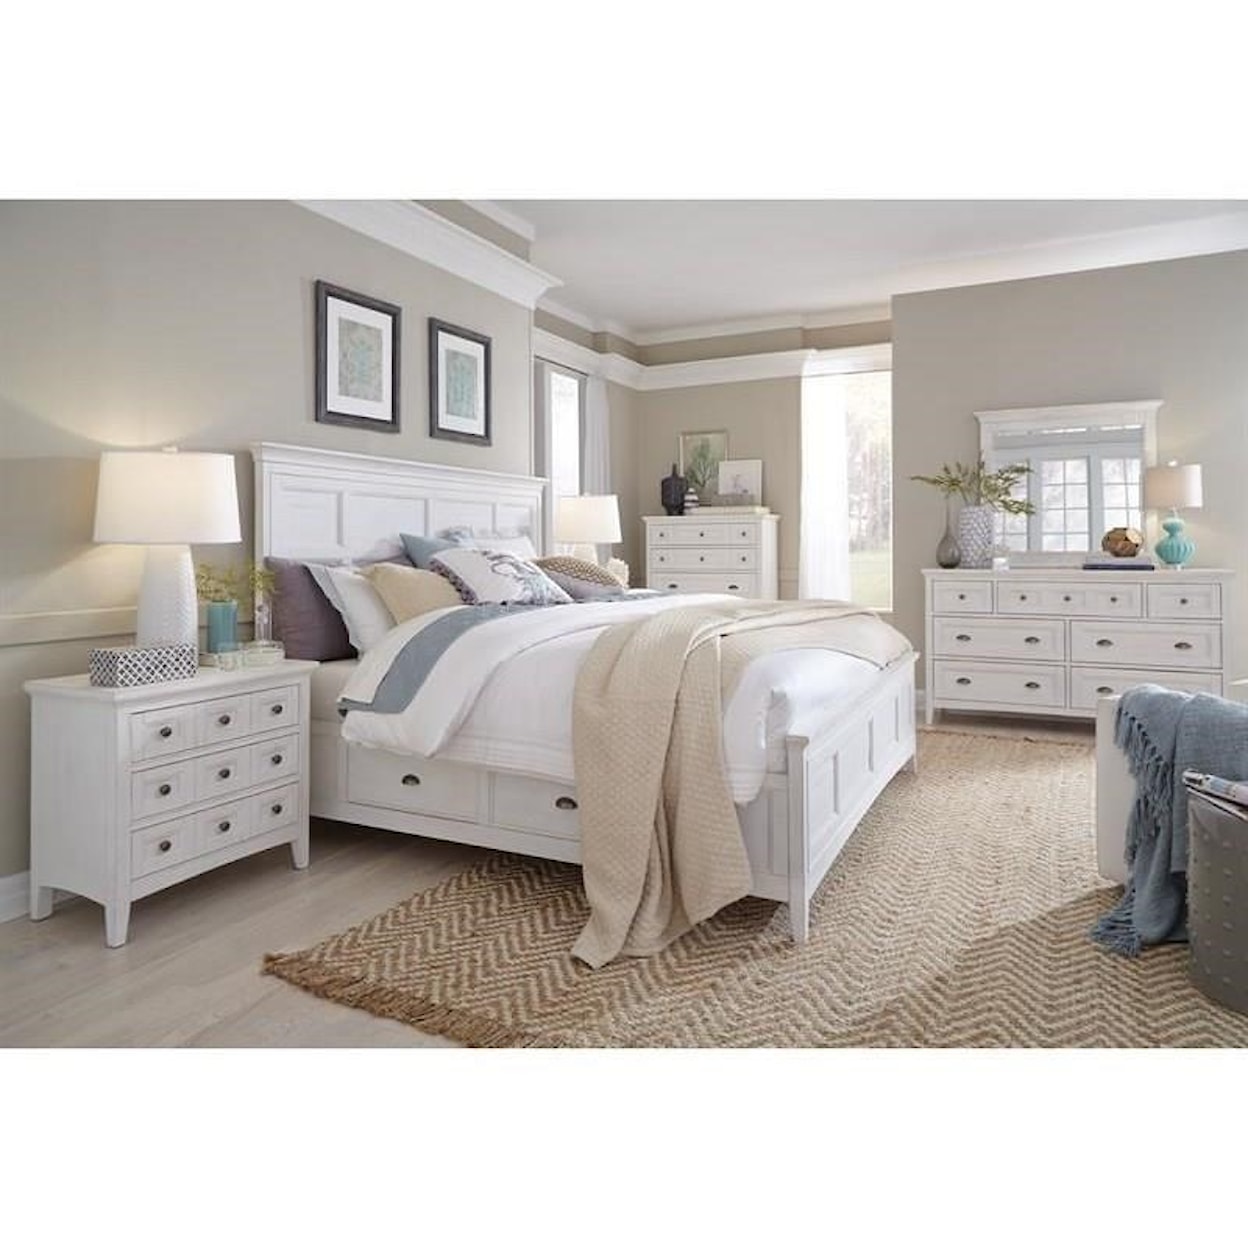 Magnussen Home Heron Cove Bedroom California King Bed with Storage Rails